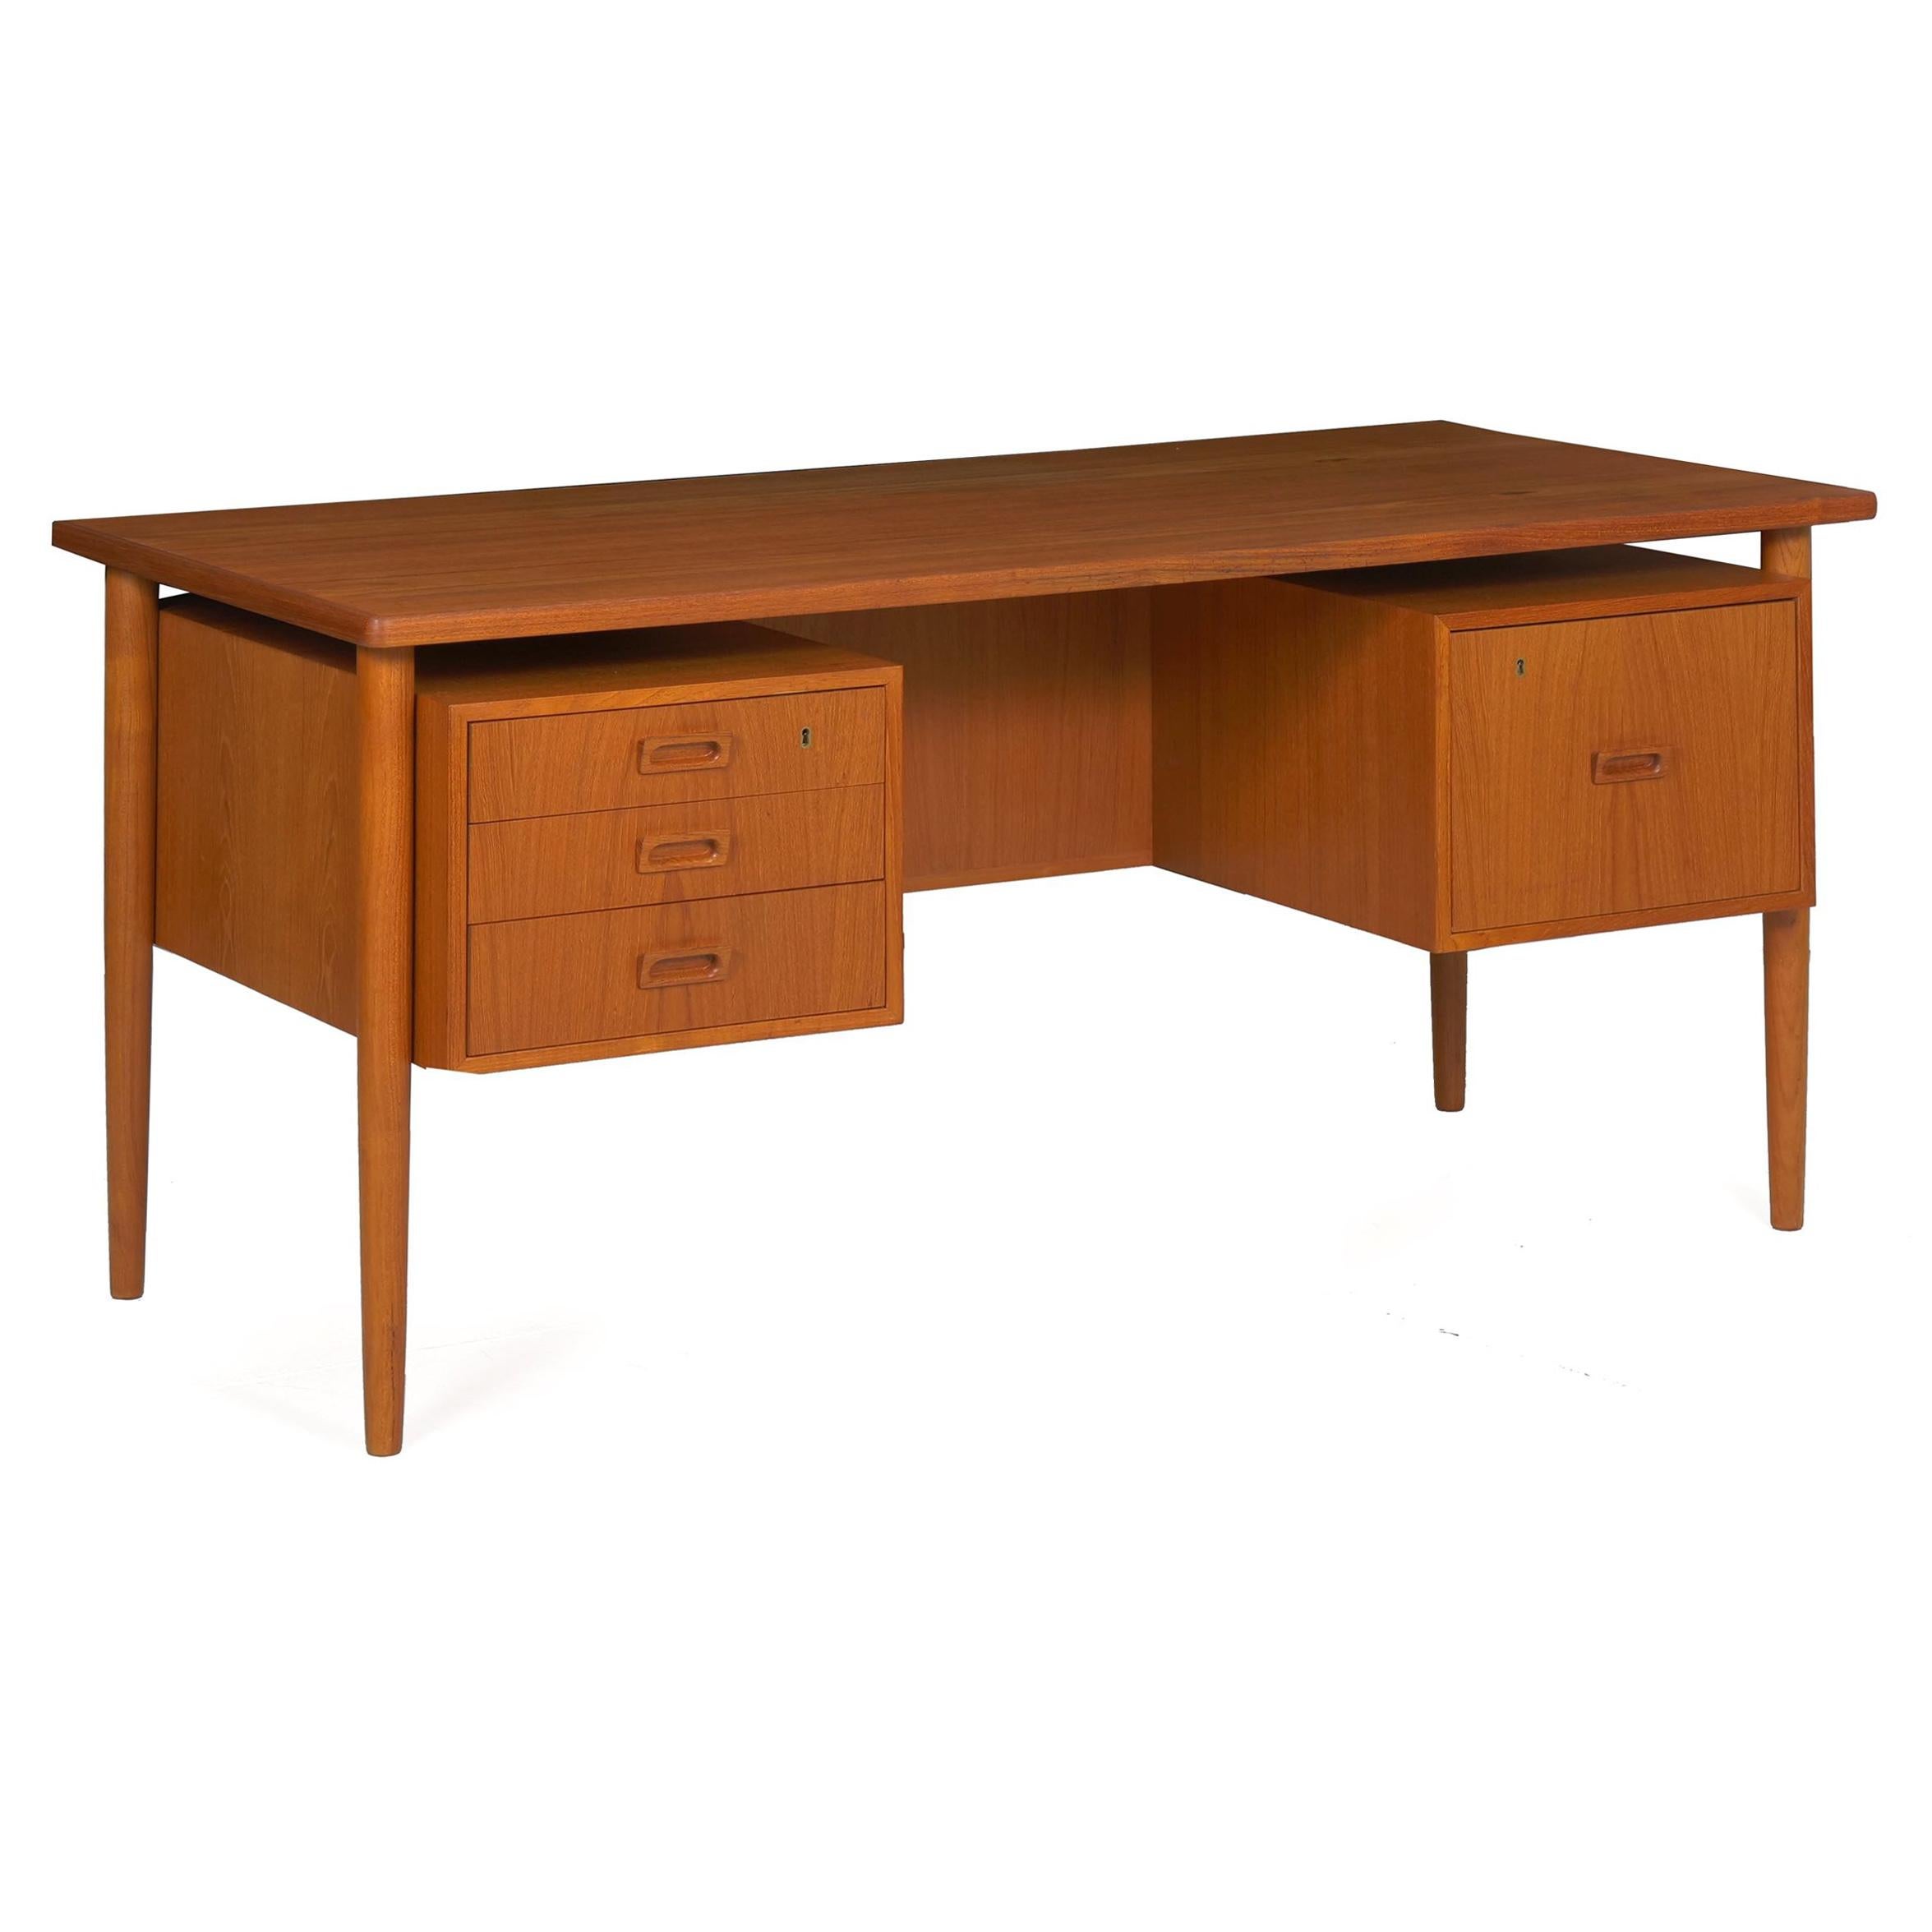 A sleek and austere executive desk manufactured by Bornholm in Denmark during the 1960s, it is beautifully preserved and conserved in-house to present in excellent condition. With a stack of three drawers on the left and a single file cabinet on the